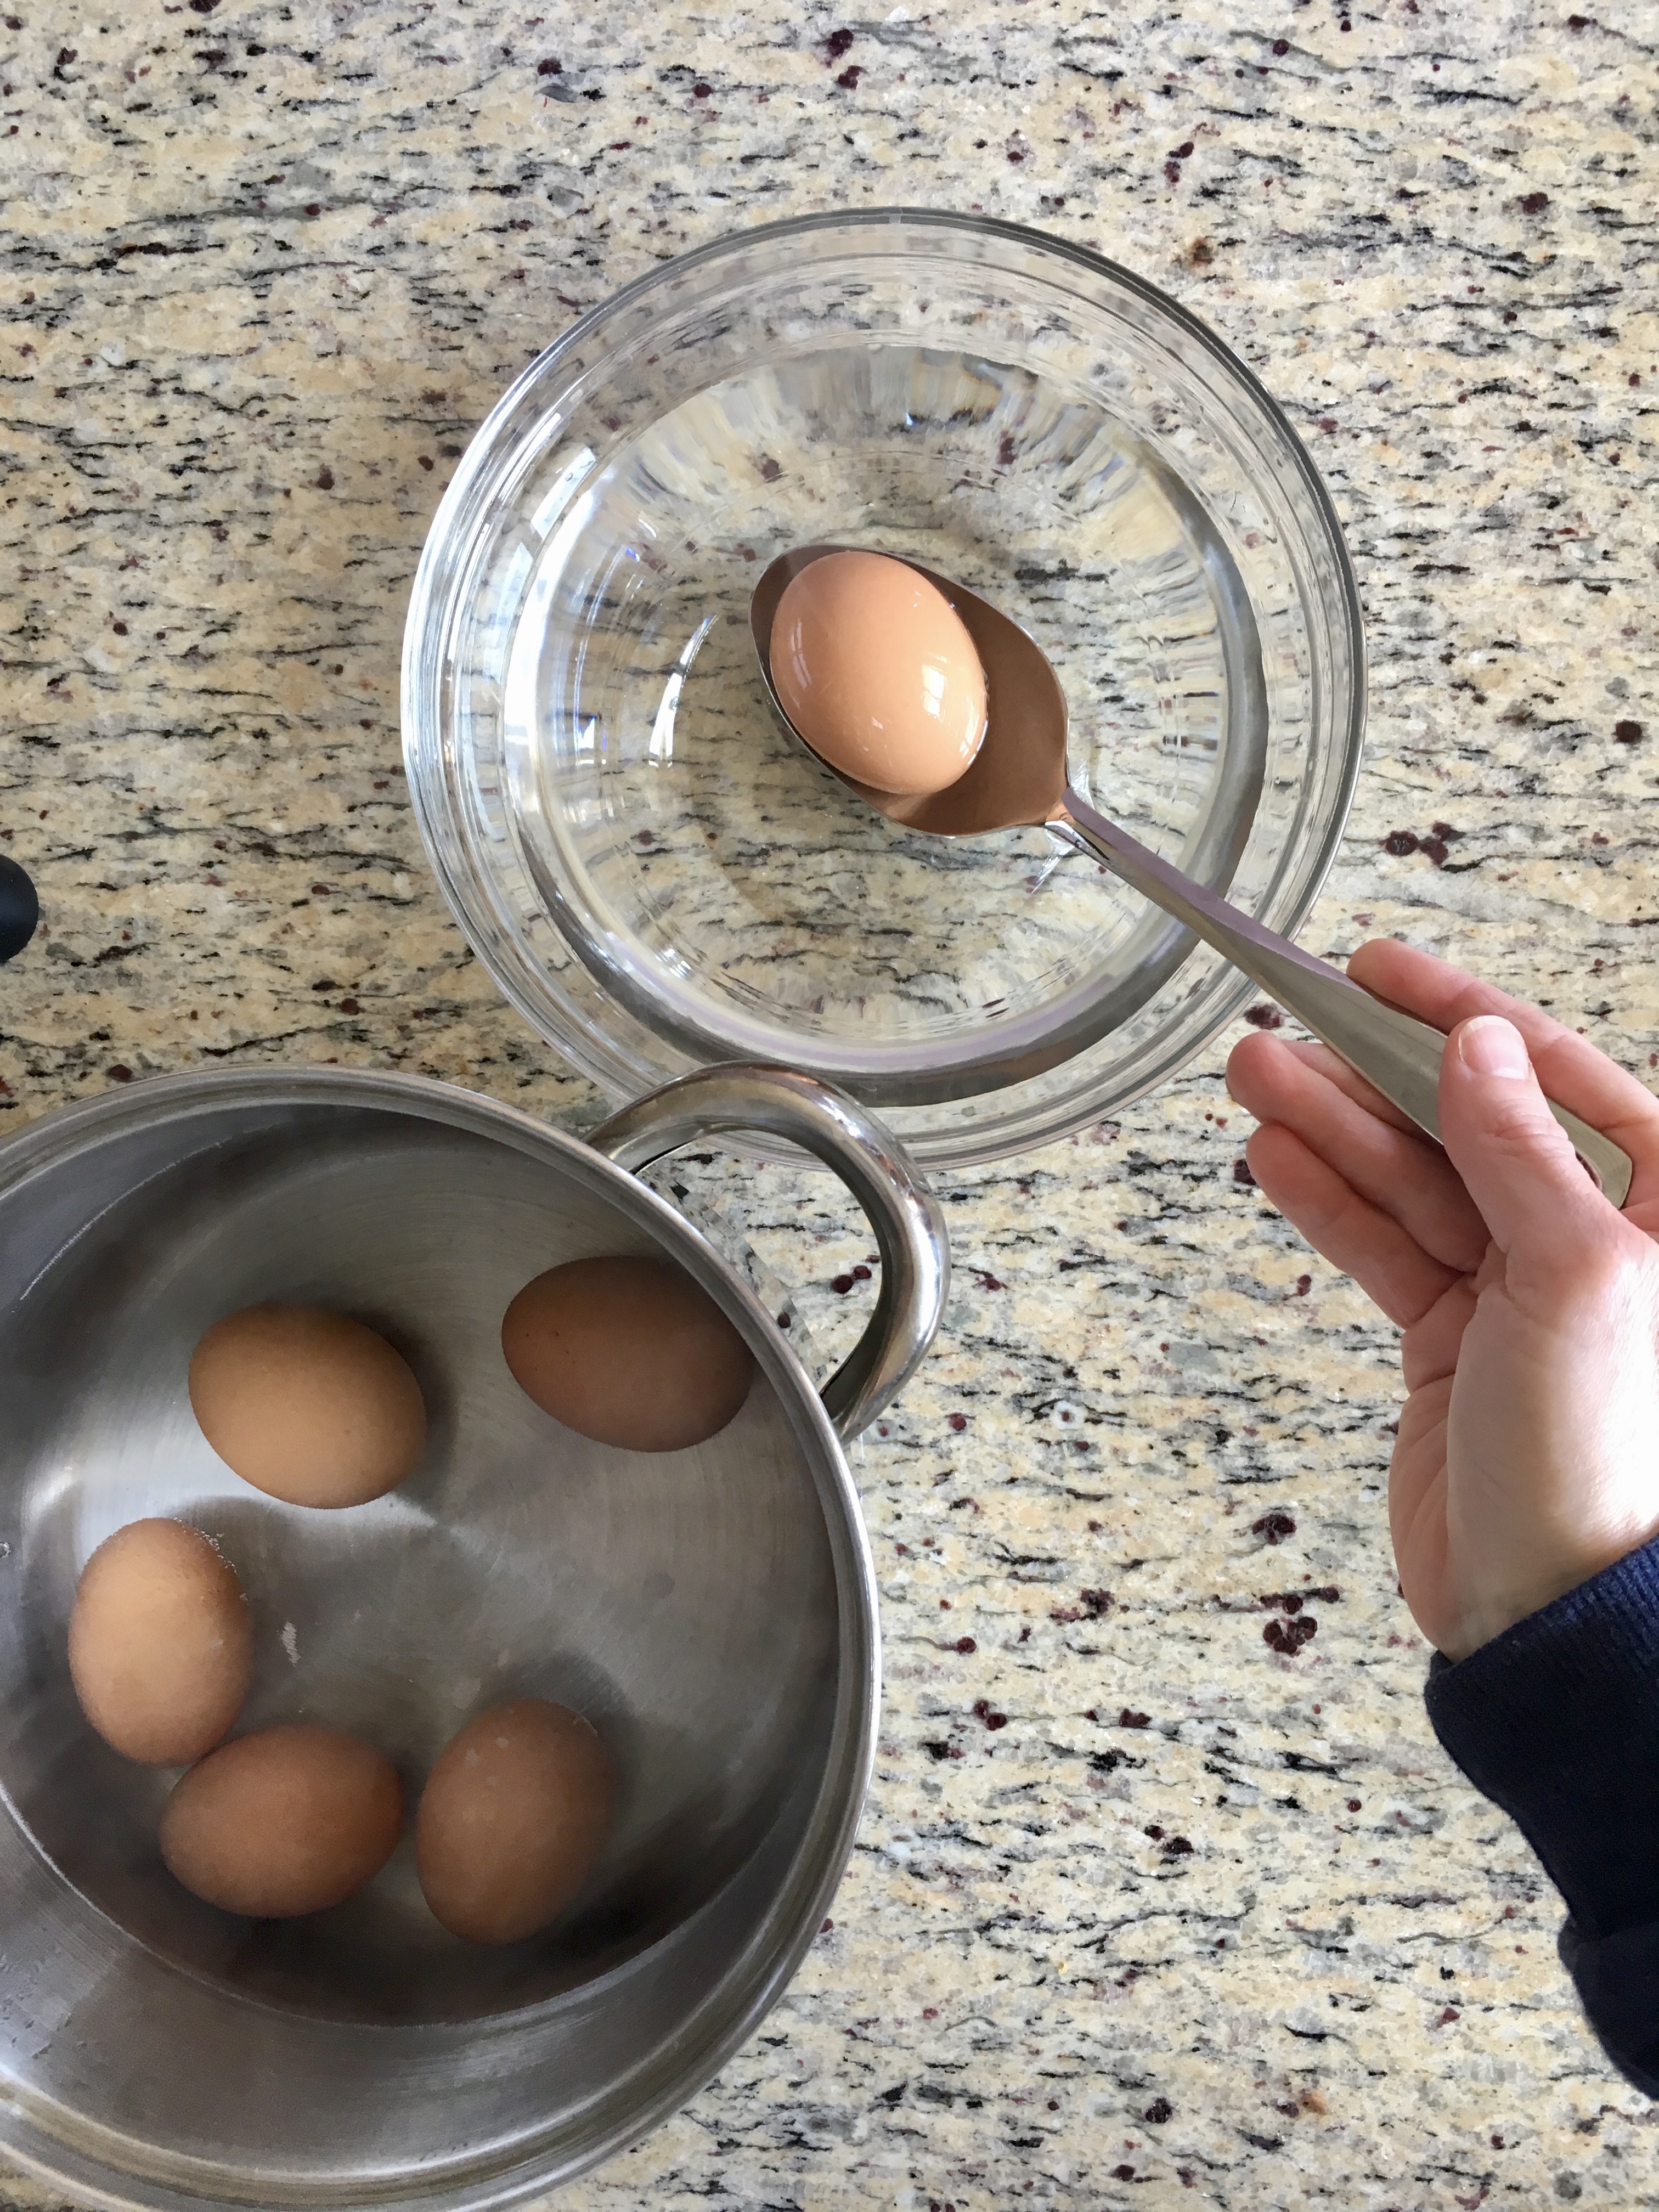 Learn how easy it is to hard boil eggs in 4 simple steps!